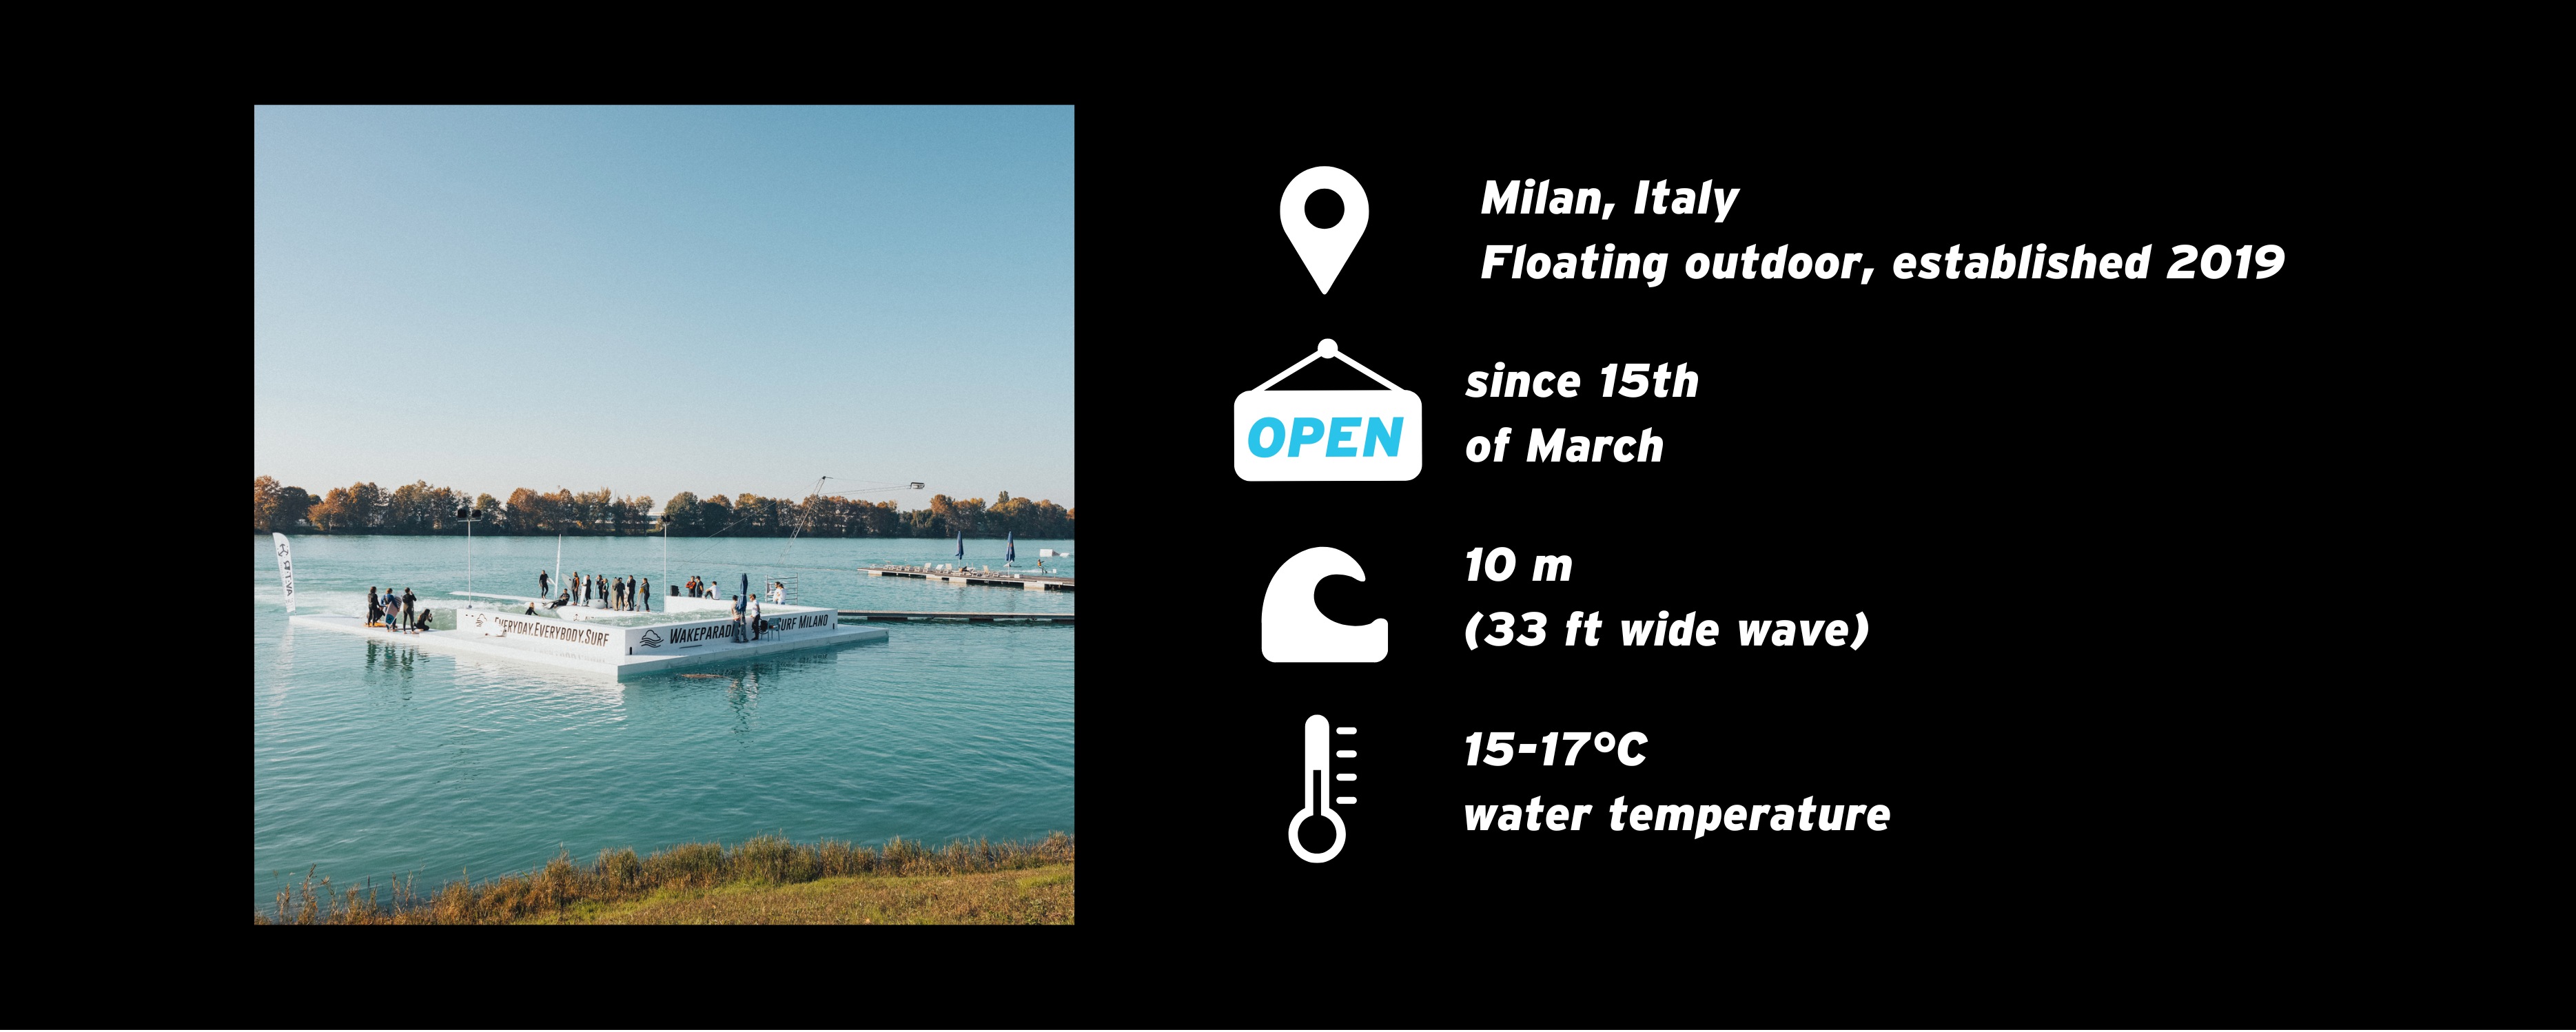 Information about the UNIT Surf Pool at Wakeparadise Milano